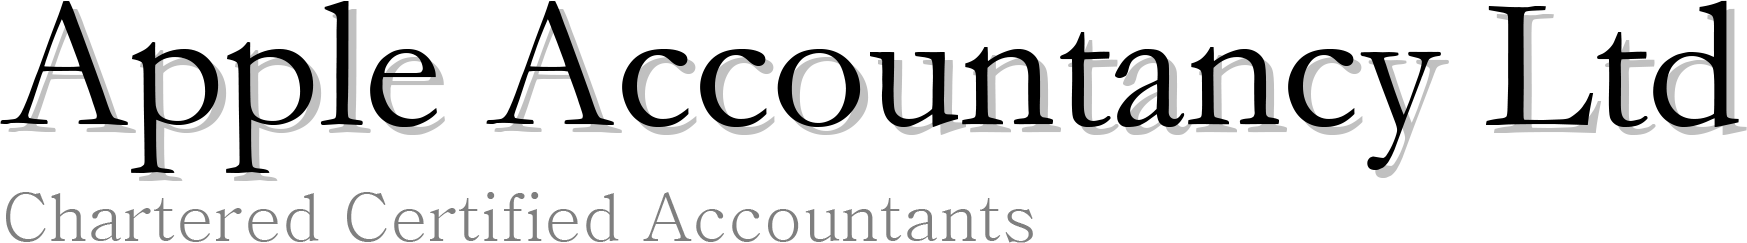 Apple Accountancy Limited